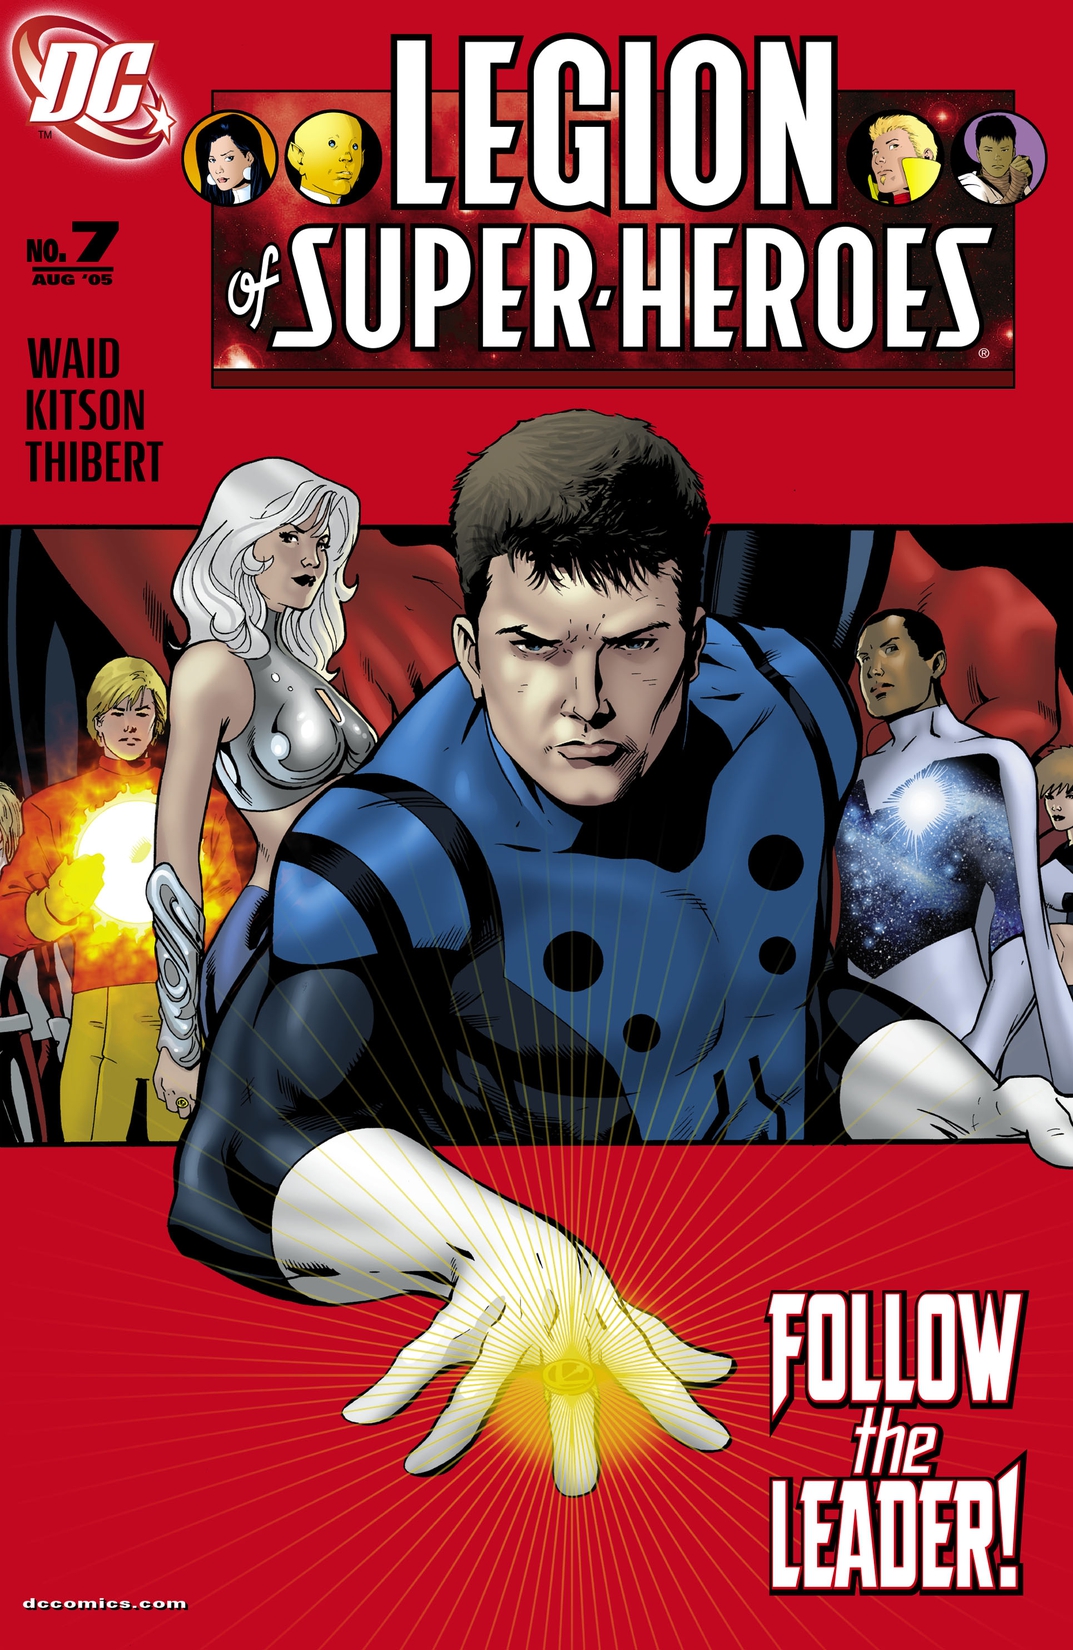 Legion of Super Heroes (2004-) #7 preview images